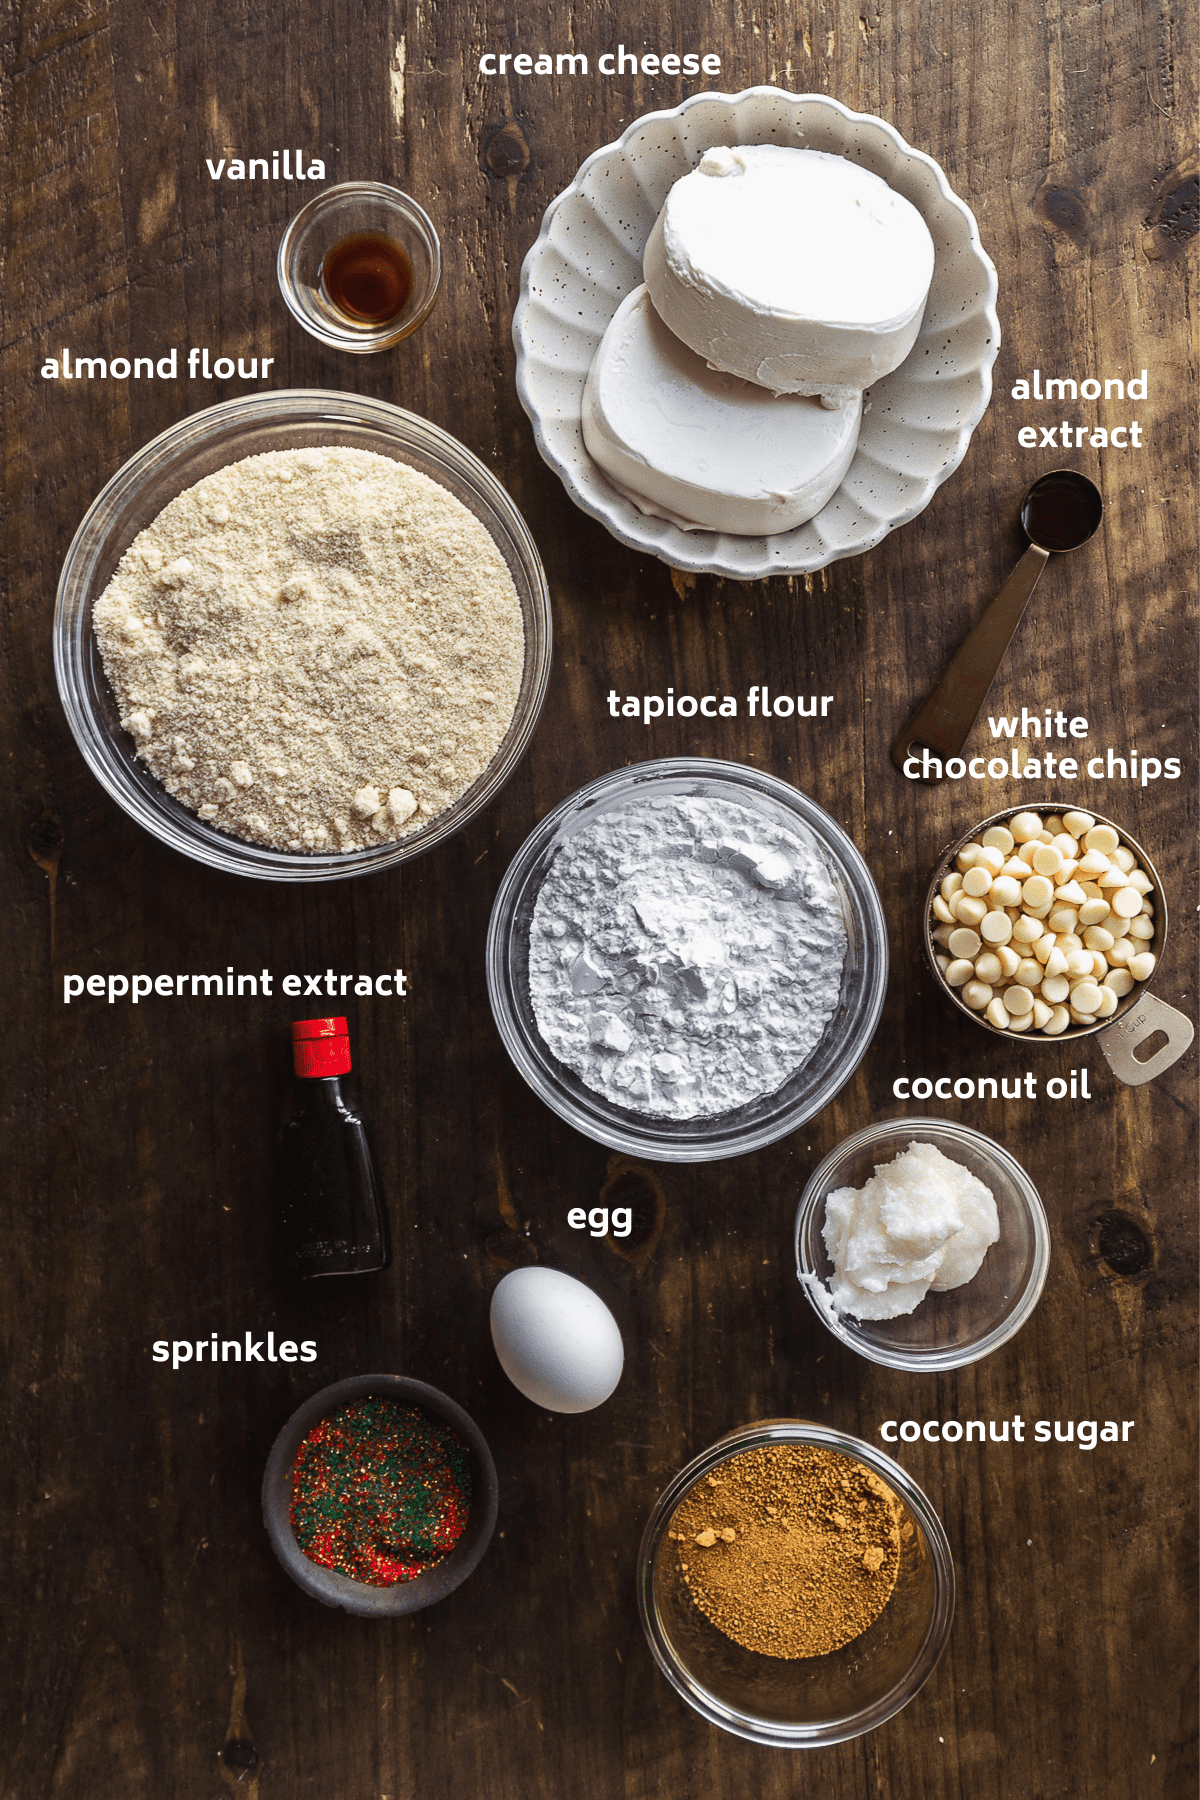 Sugar cookie pie ingredients on a wooden surface with labels in white.